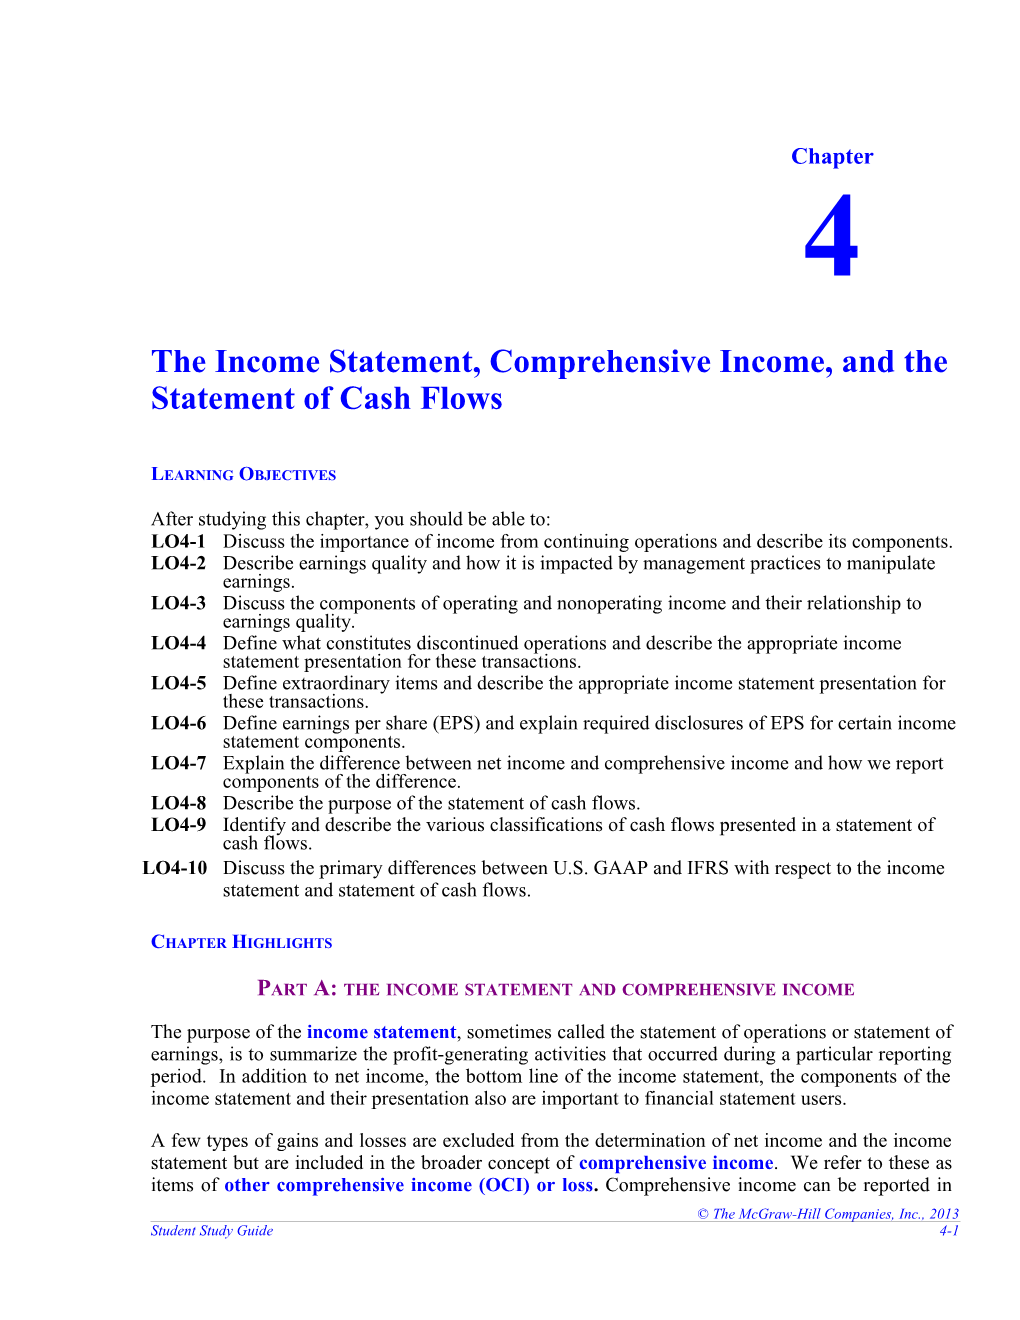 The Income Statement, Comprehensive Income, and the Statement of Cash Flows